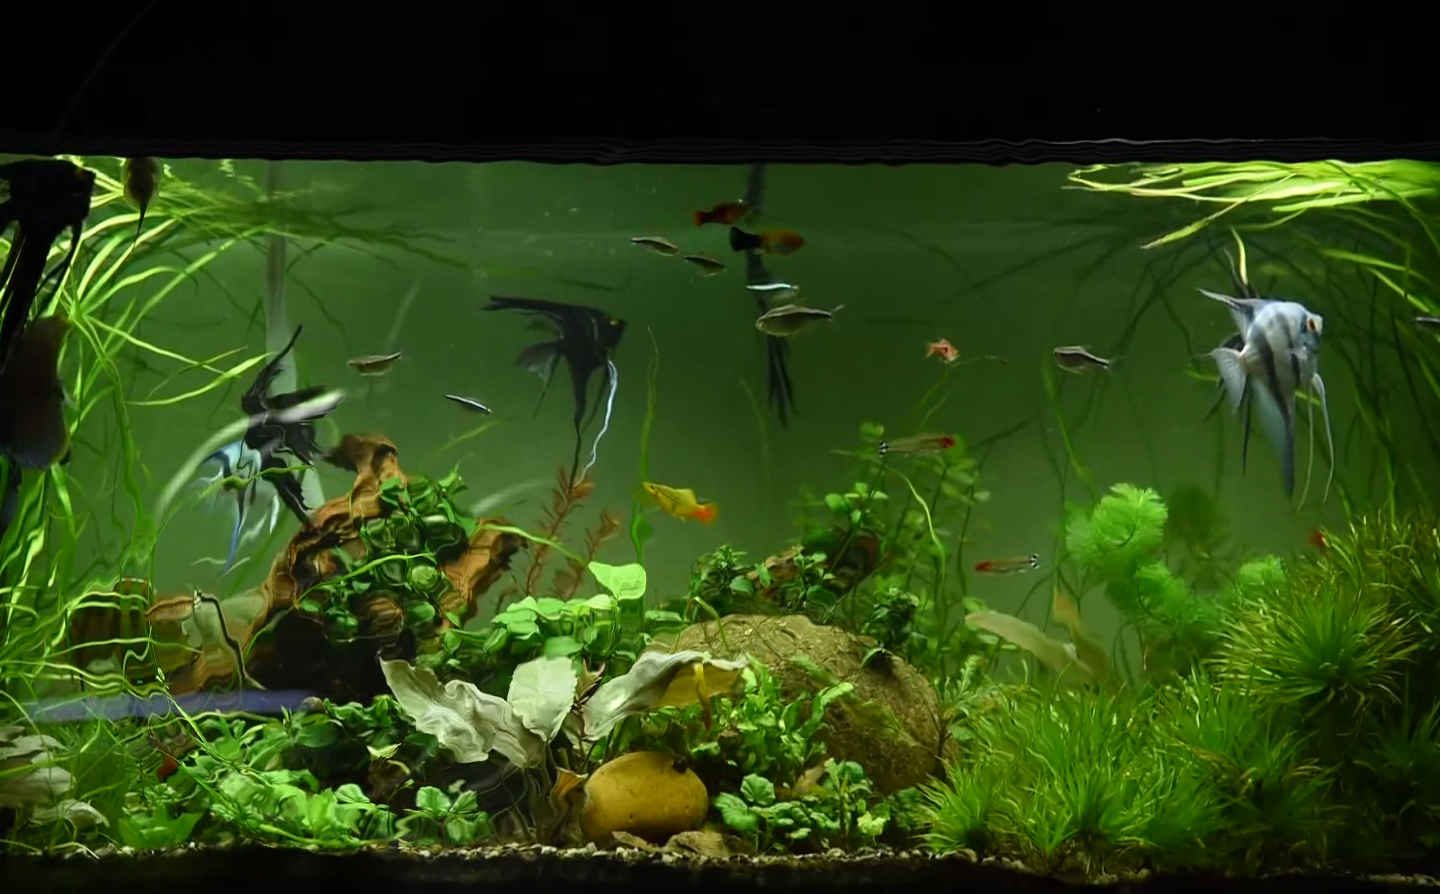 Still image of a tropical fish tank, represents the media player activity on the Imaginate suite